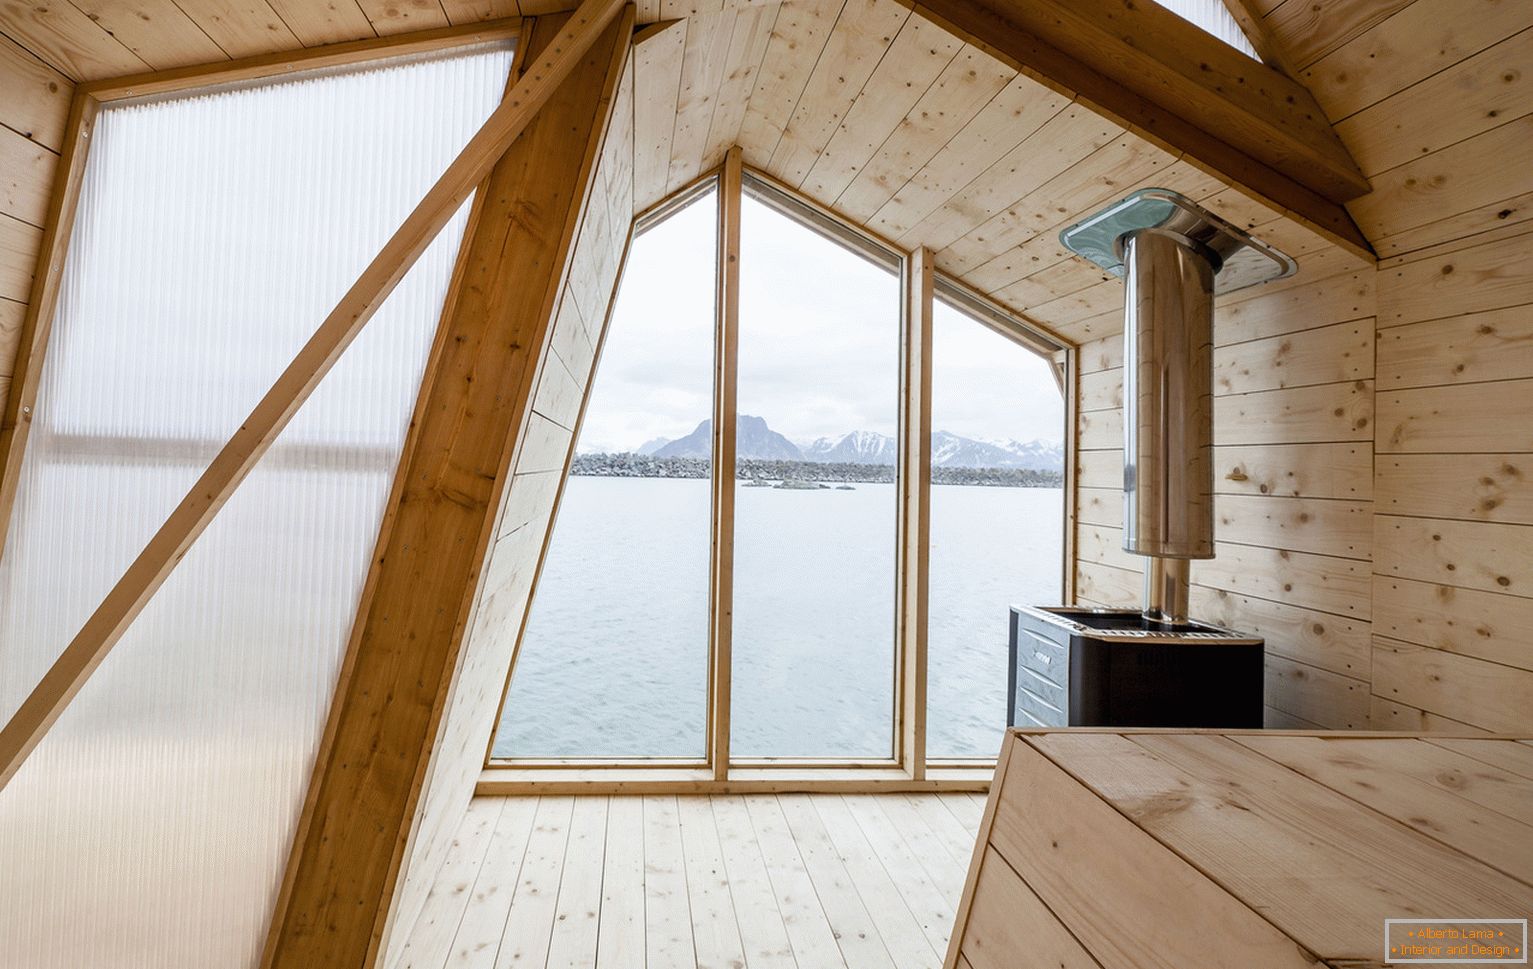 Design of a fishing lodge in Norway